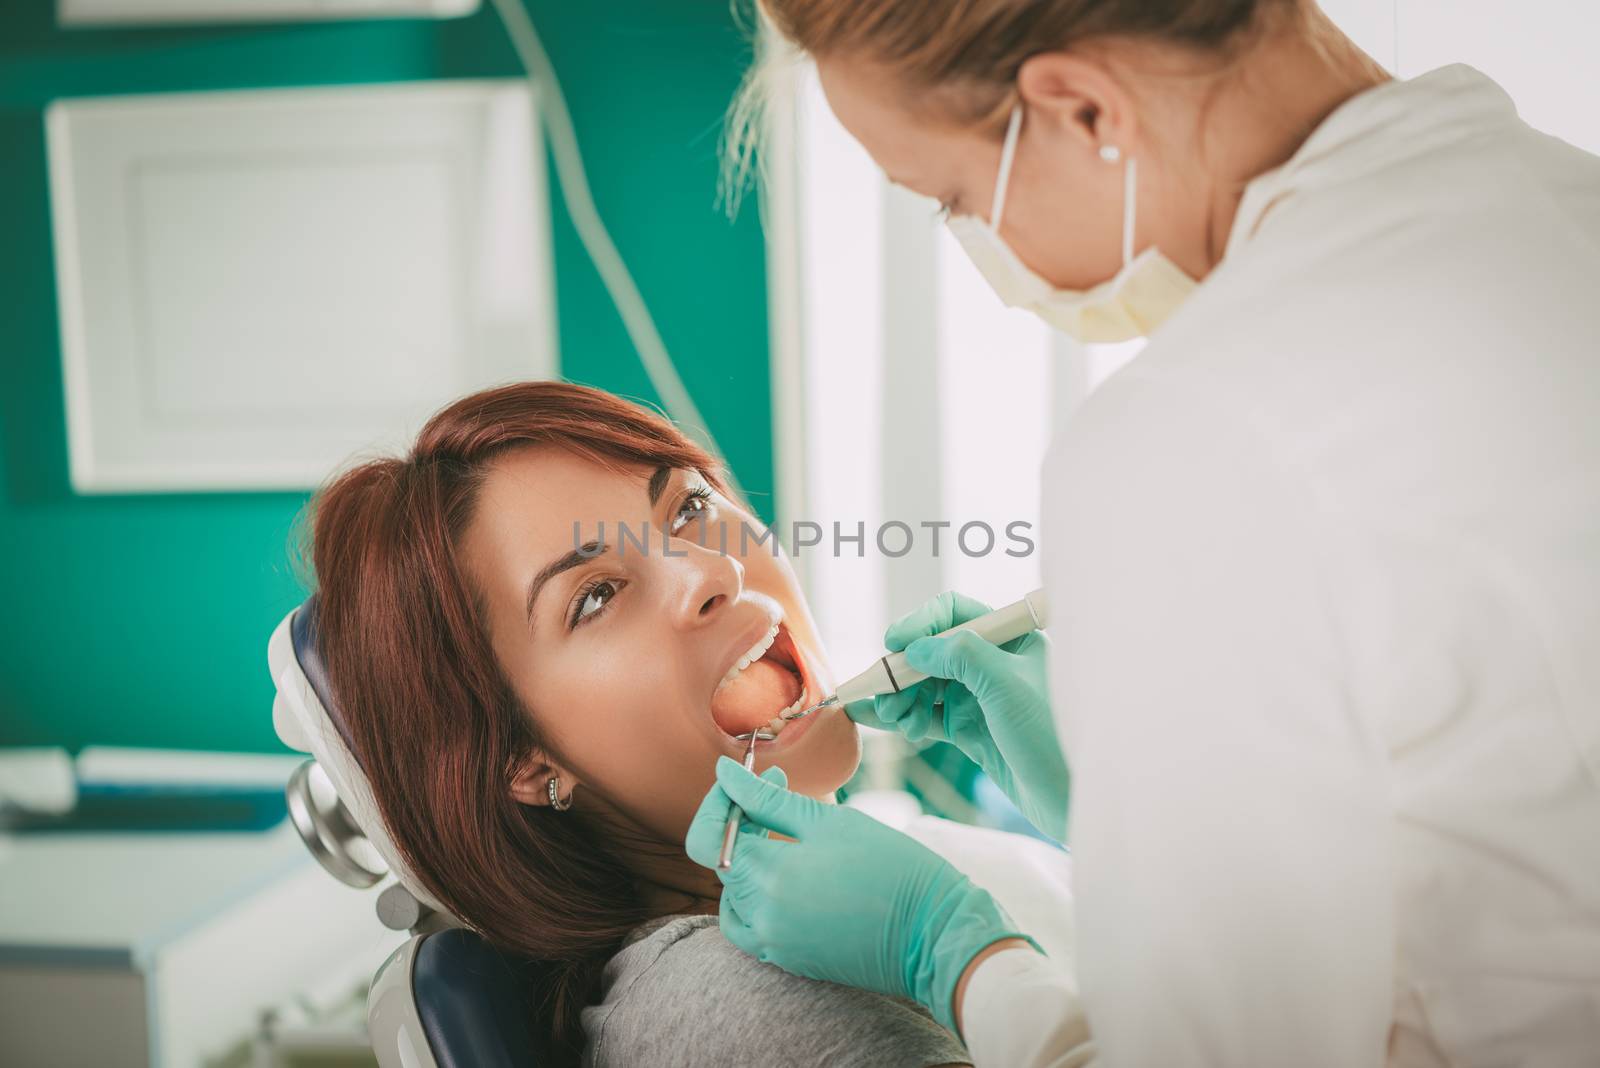 At The Dentist by MilanMarkovic78